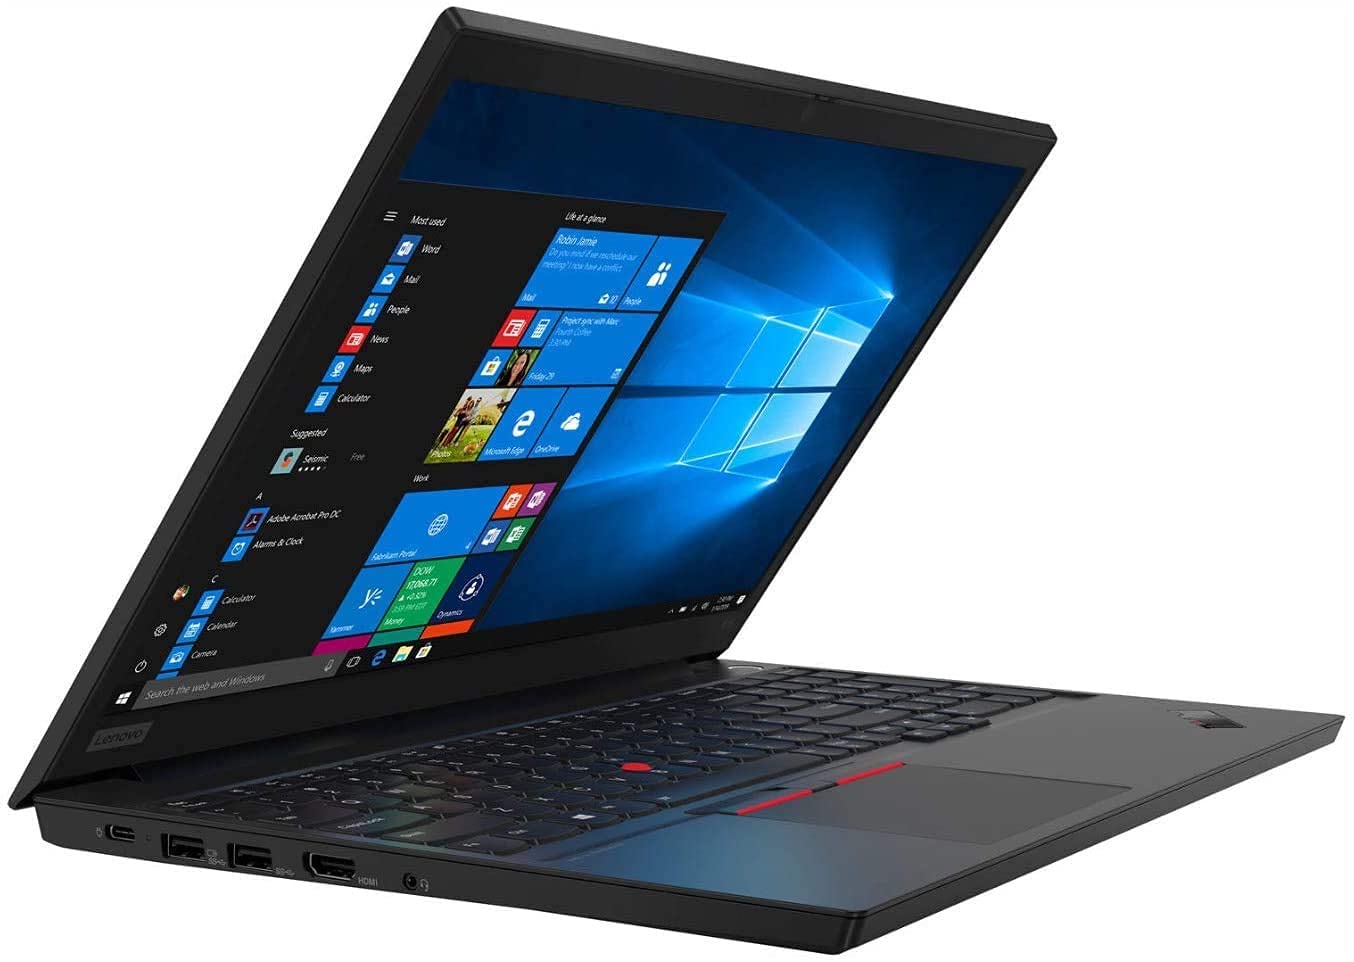 ThinkPad E15 AMD G4, Ryzen 55625U (2.3ghz, 3MB) 15.6" 1920x1080, 24GB, 512SSD M.2., W10, 3YR. - 21EES21G00